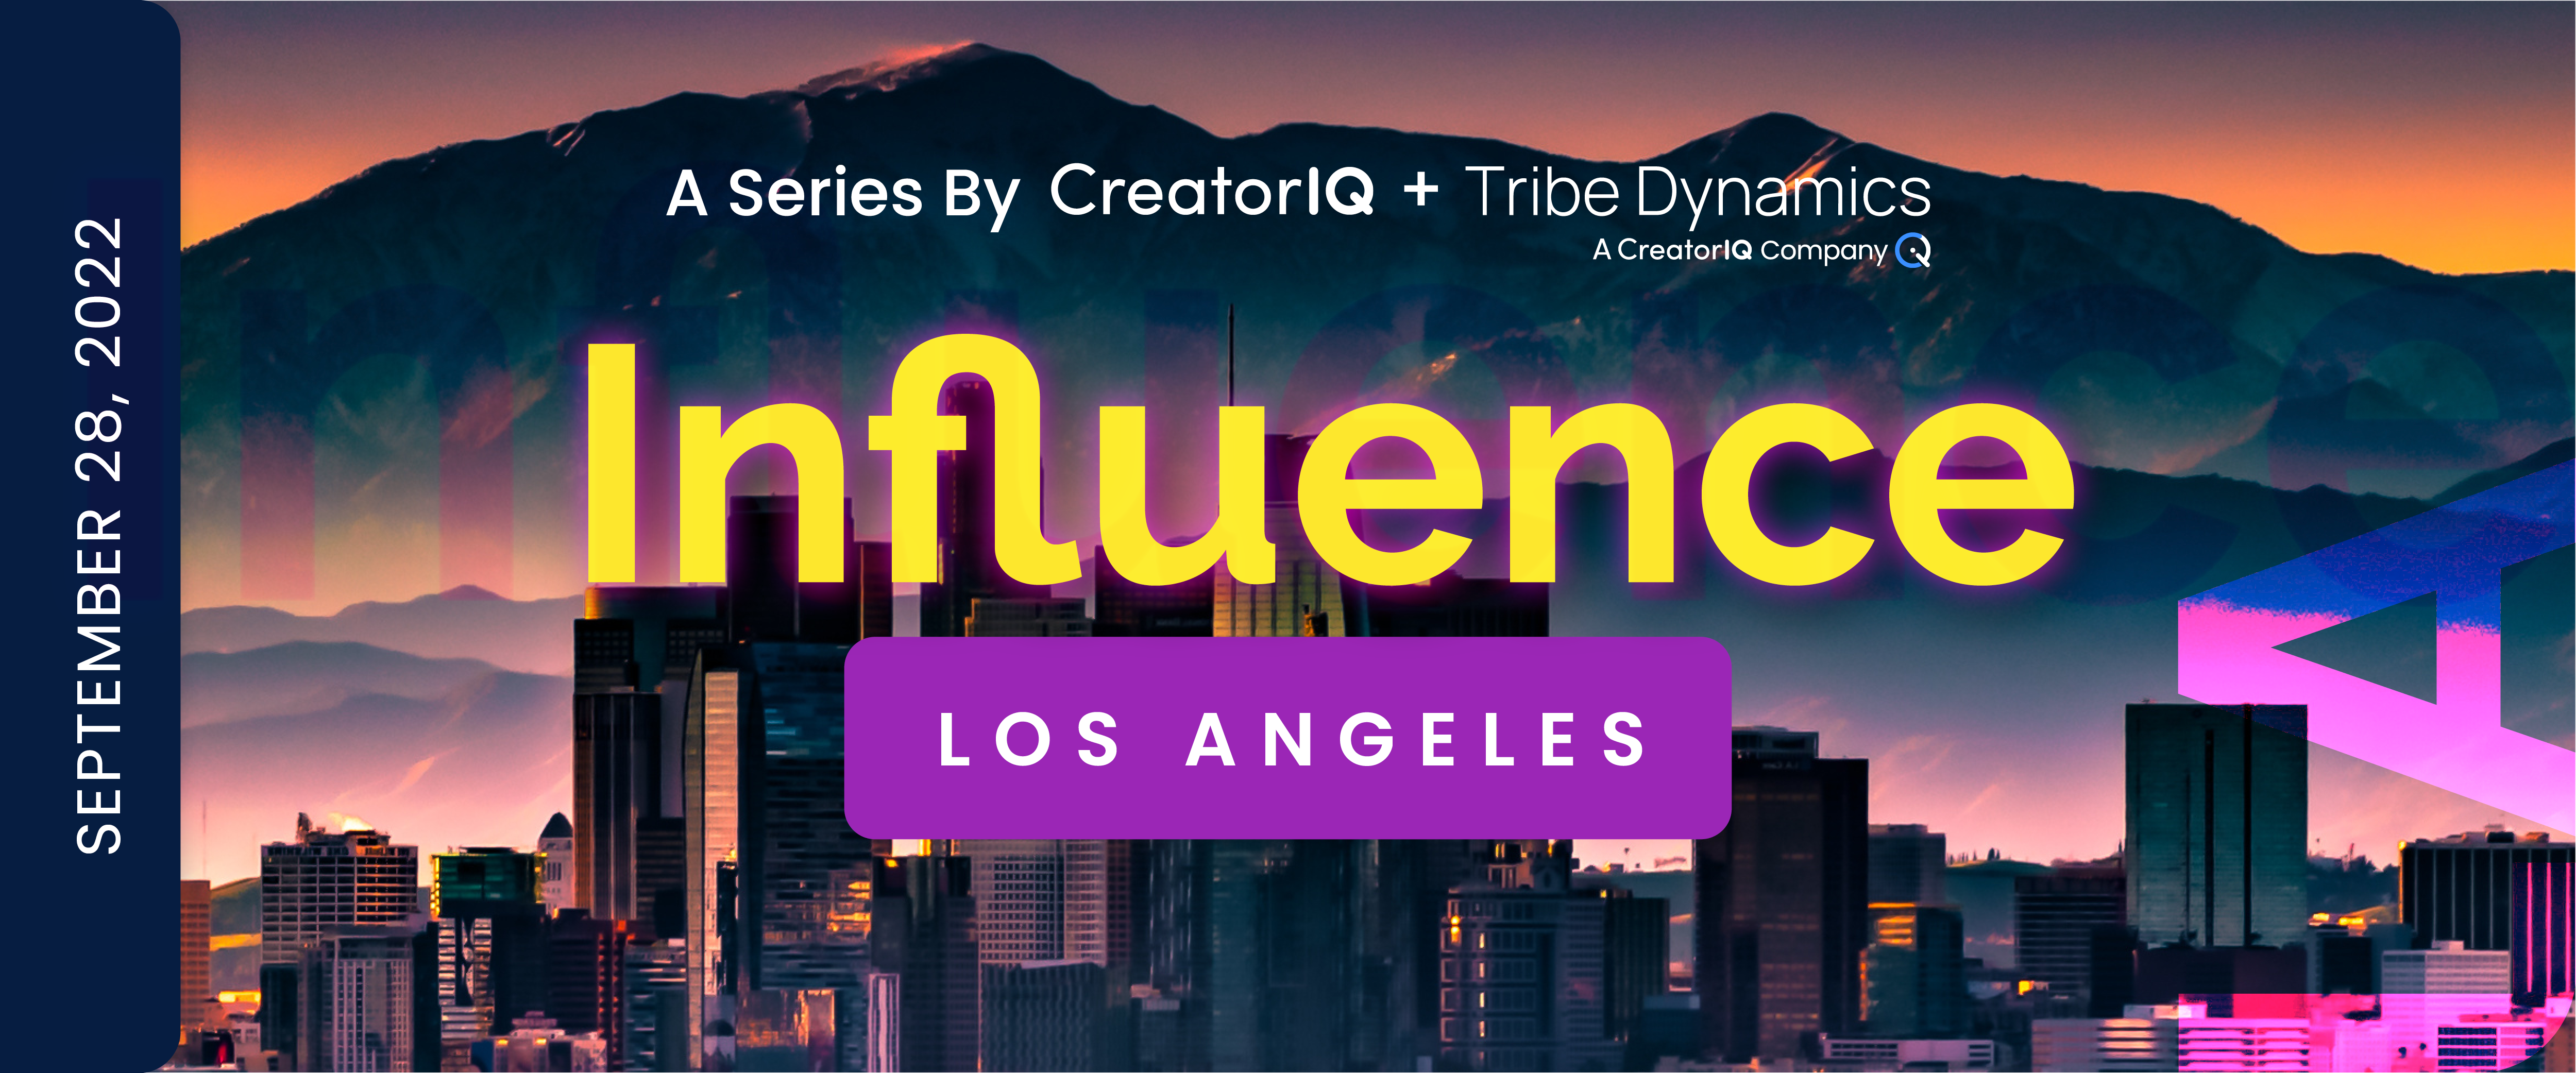 Influence - LA-EMAIL BANNER